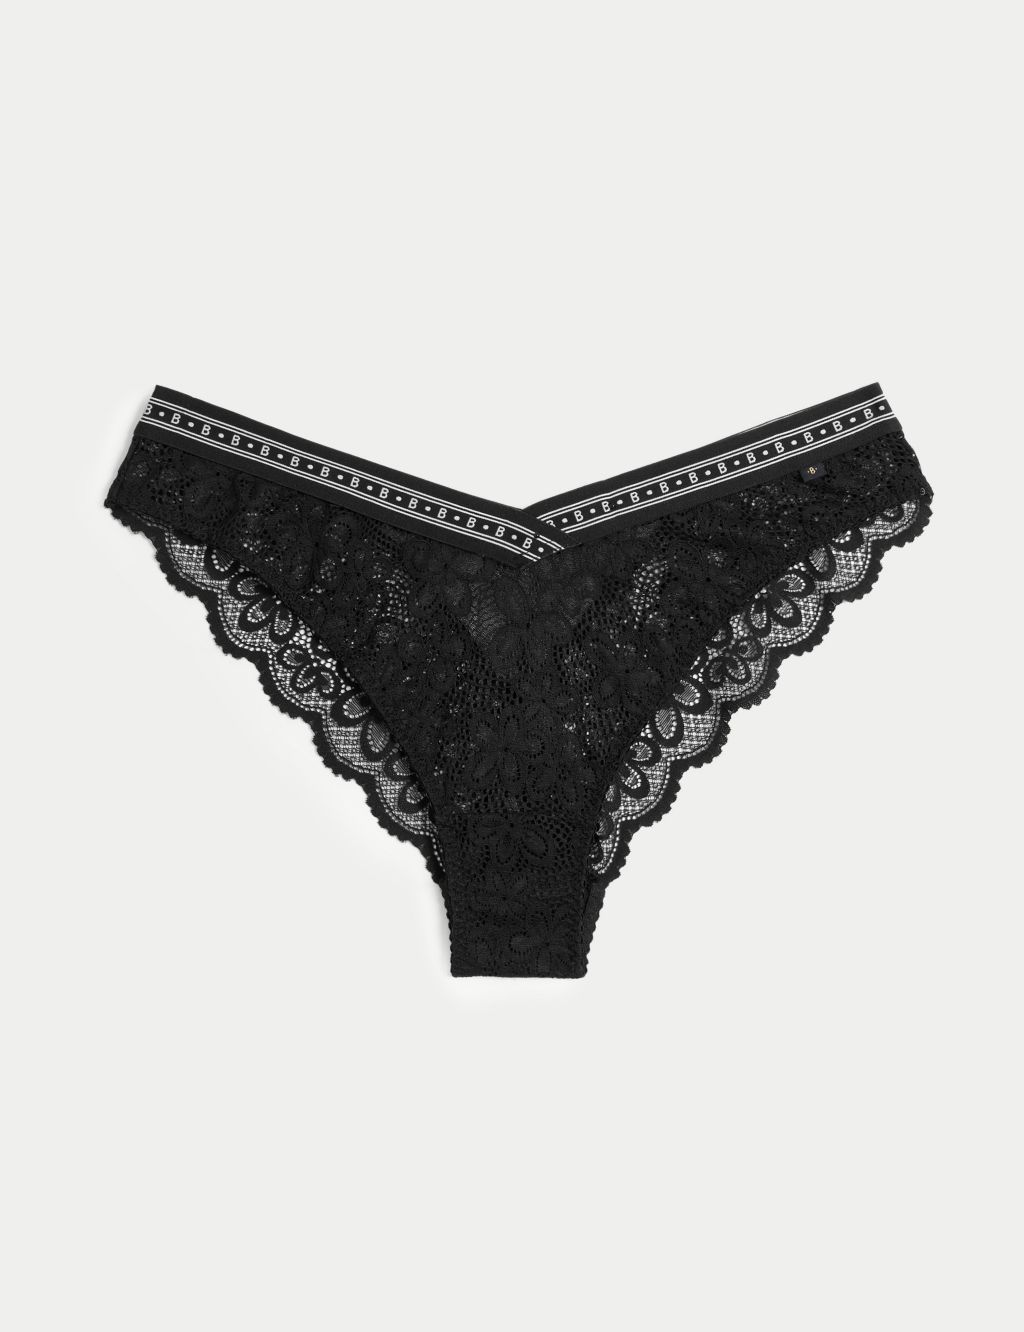 Cleo Lace Miami Knickers image 2